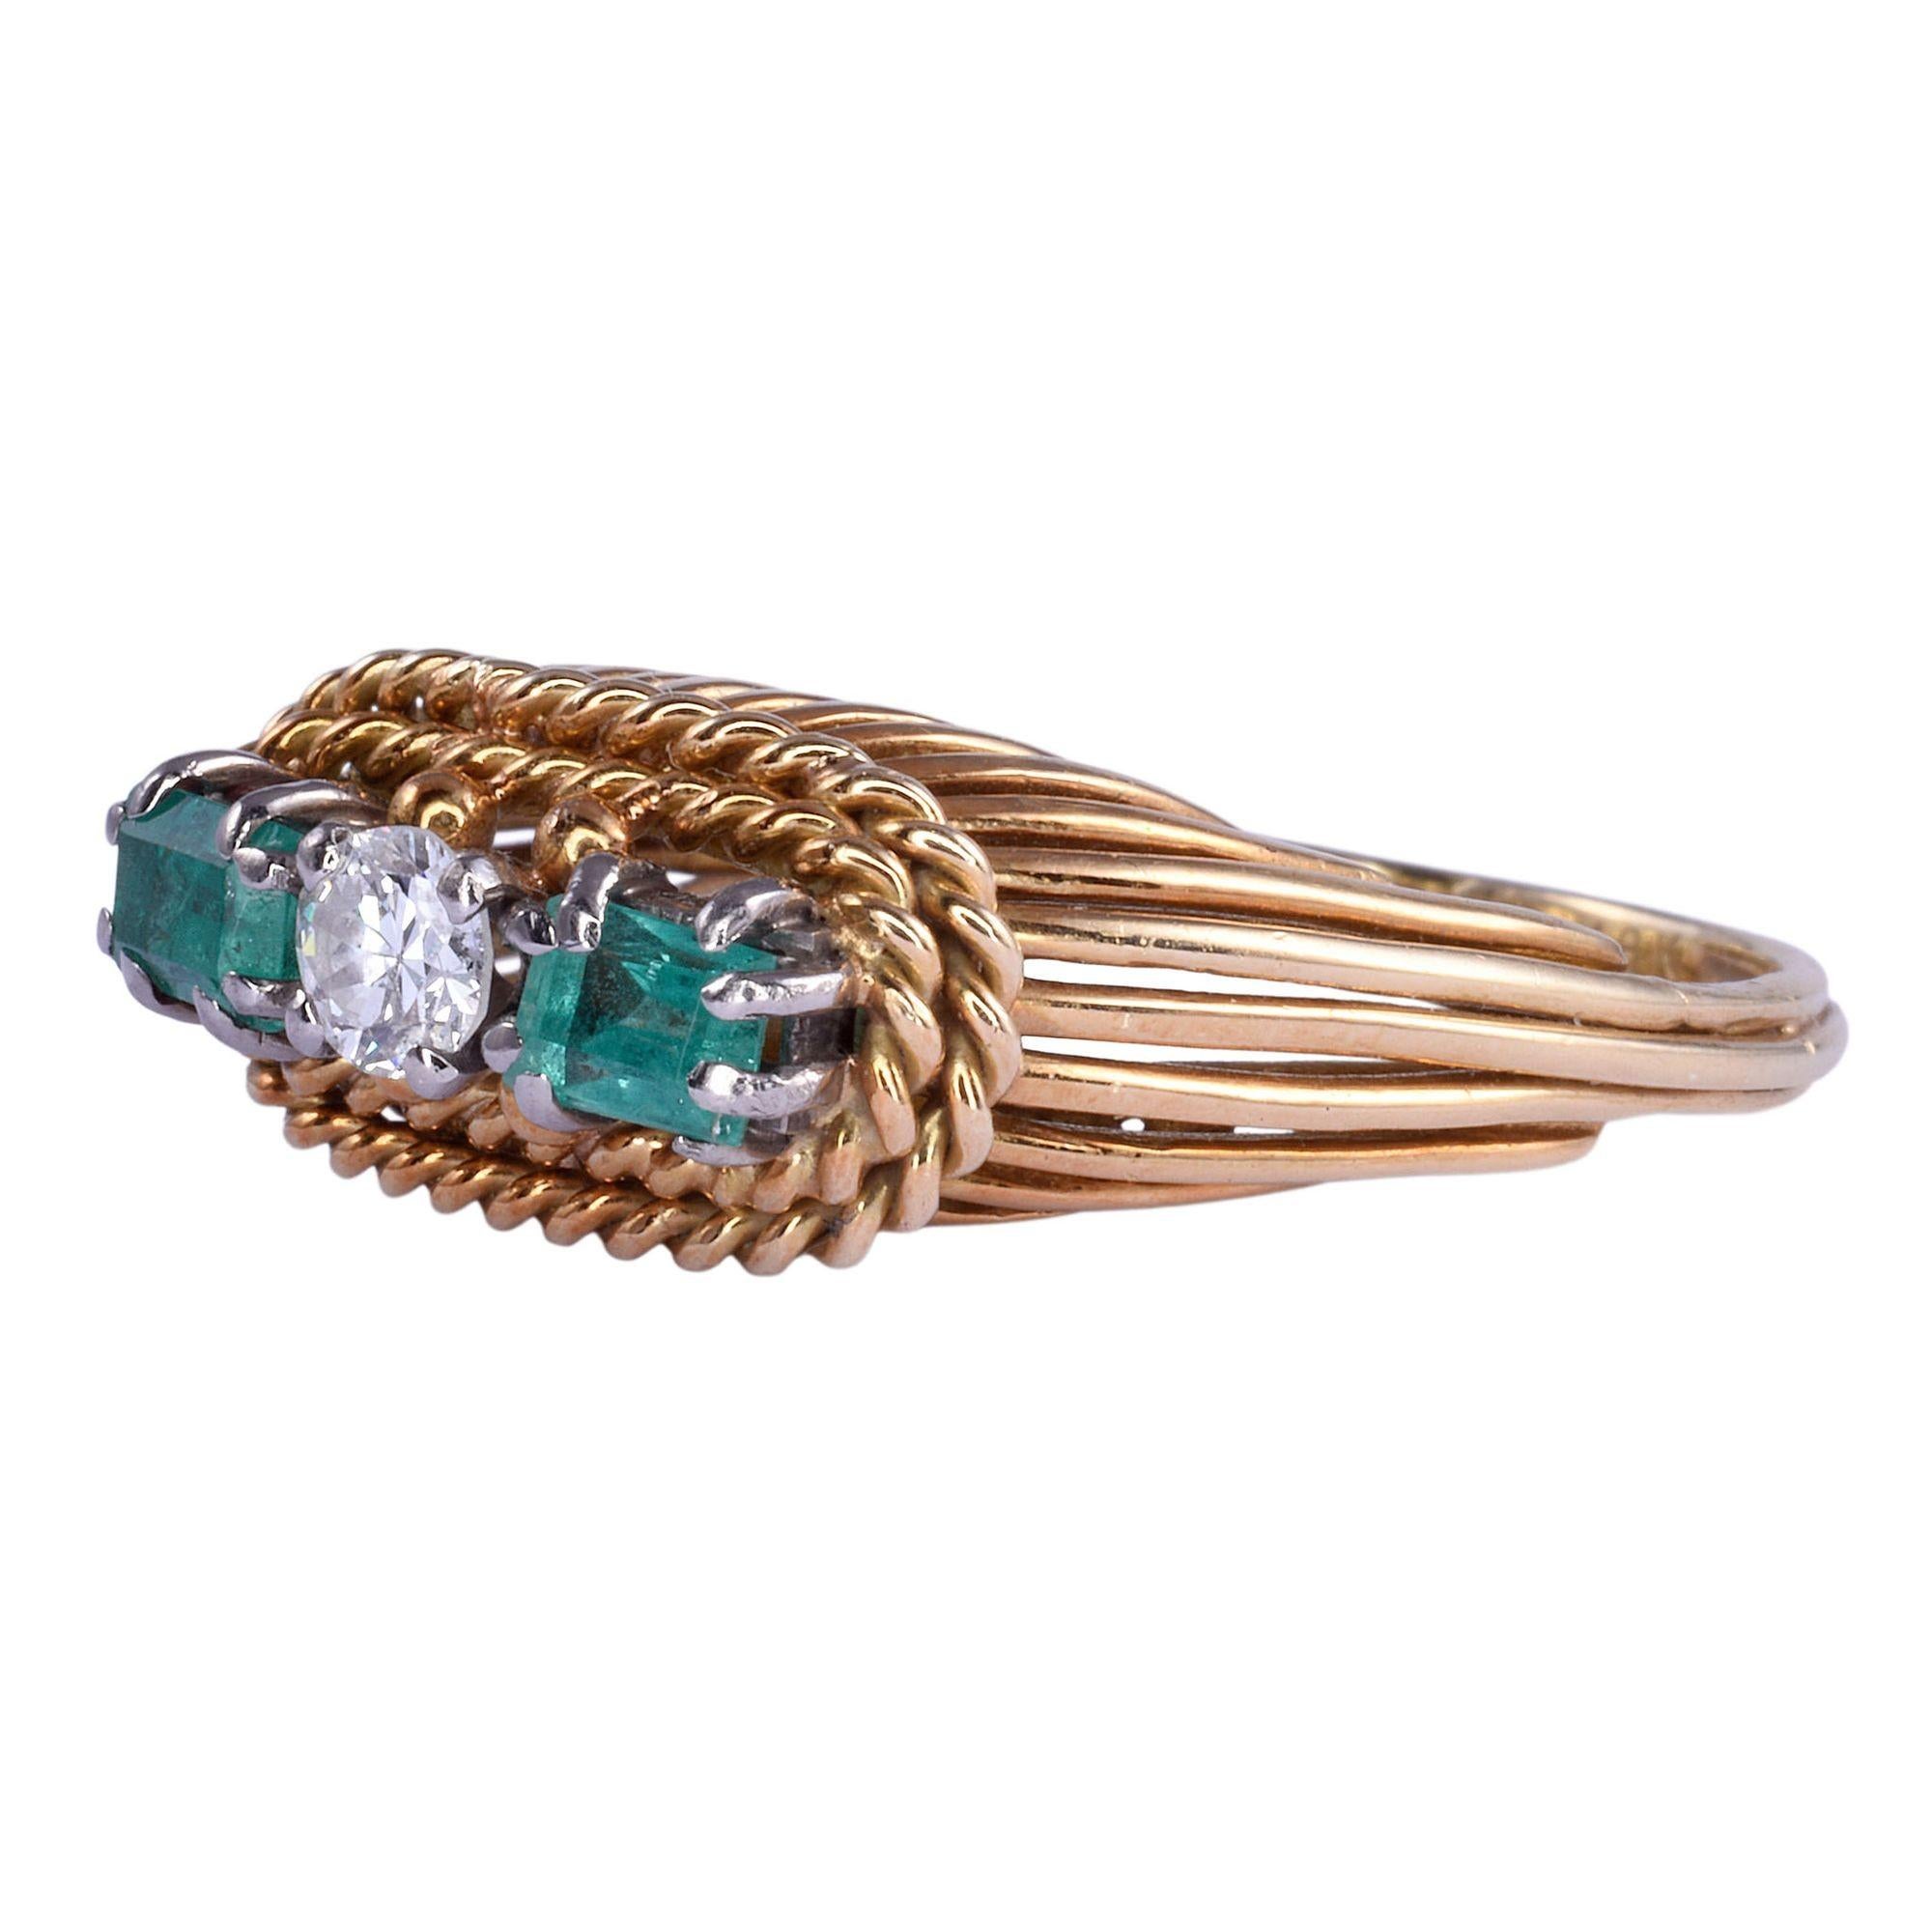 Vintage diamond emerald 18K gold ring. This vintage ring is crafted in 18 karat yellow gold featuring a twisted rope design with a .15 carat diamond center. The diamond has VS2 clarity and G color. There are also two emeralds at .40 carat total